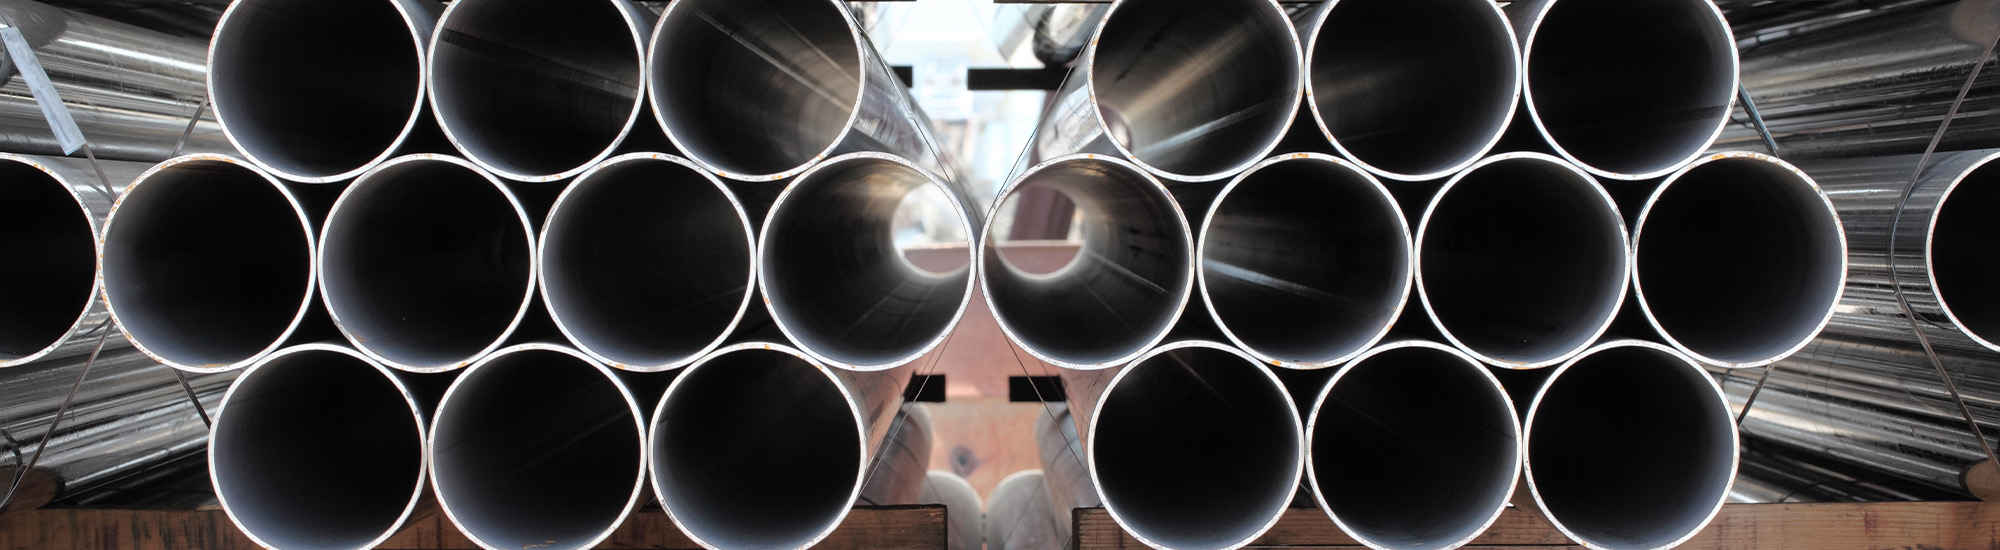 Close-up Of Pipes